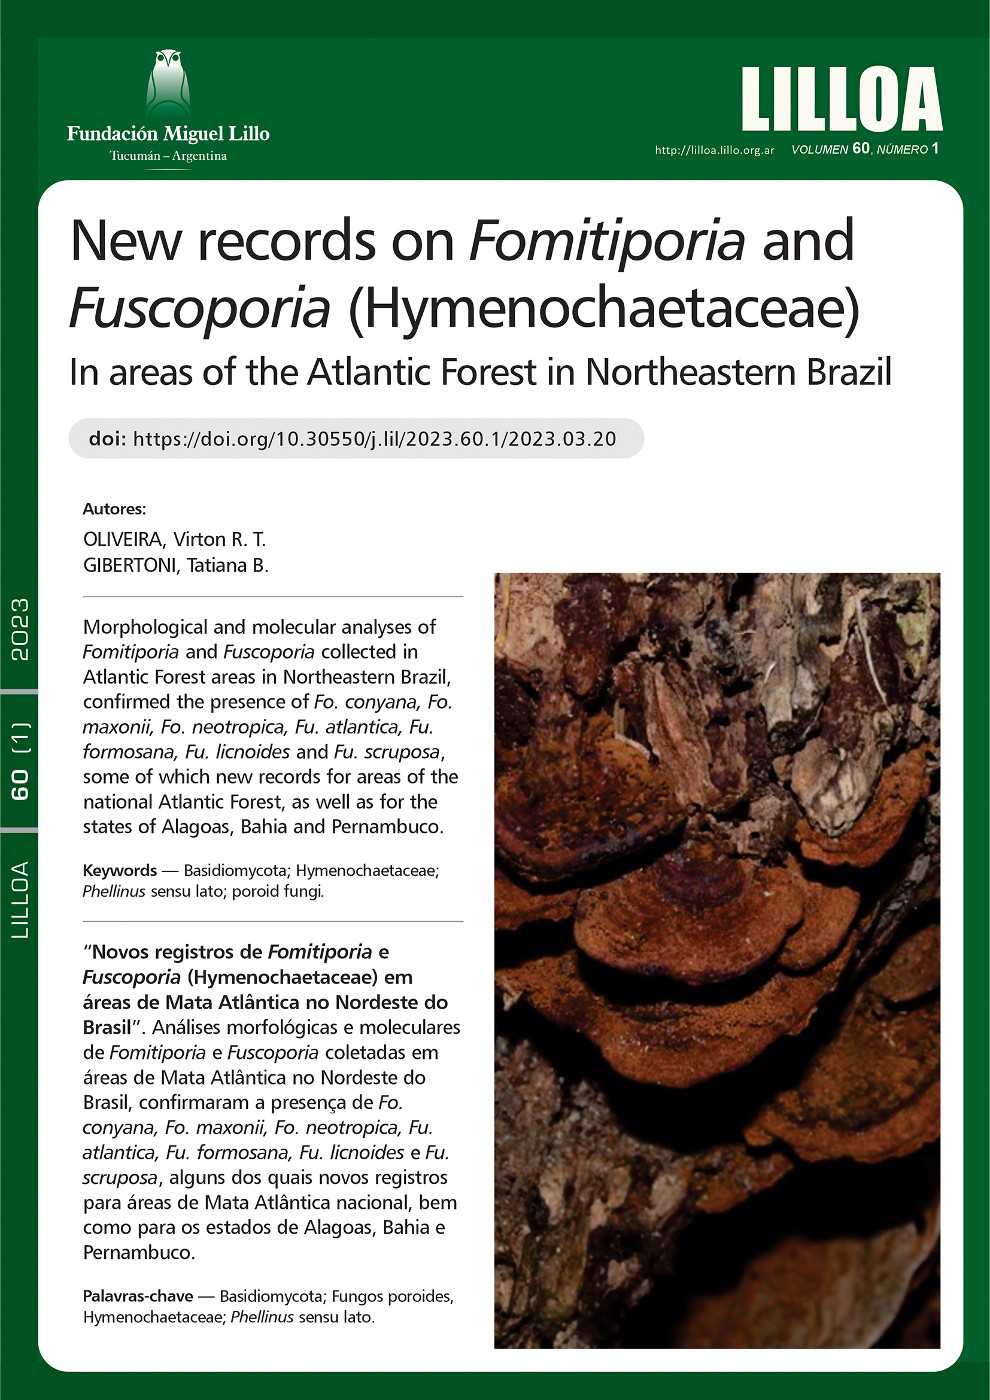 New records on Fomitiporia and Fuscoporia (Hymenochaetaceae) in areas of the Atlantic Forest in Northeastern Brazil: Fomitiporia and Fuscoporia in Northeast Brazil